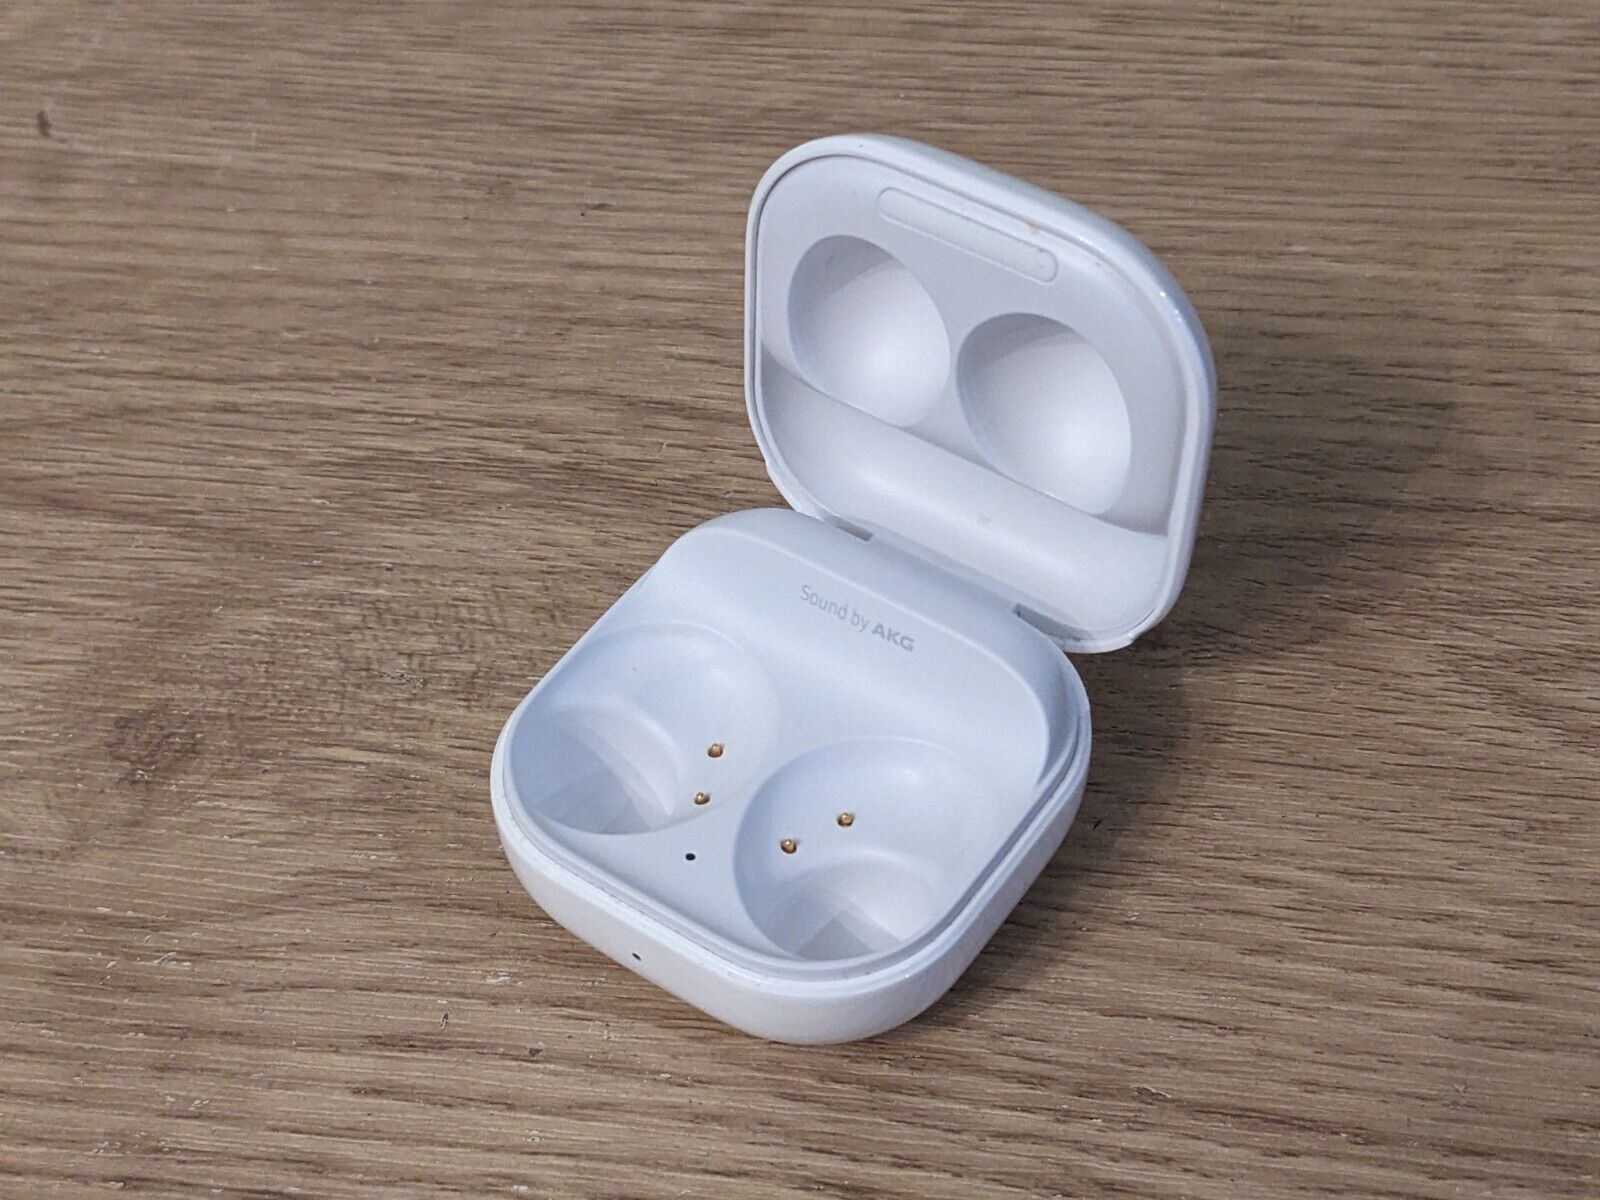 Samsung Galaxy Buds2 replacement parts: charging case, left/right earbuds